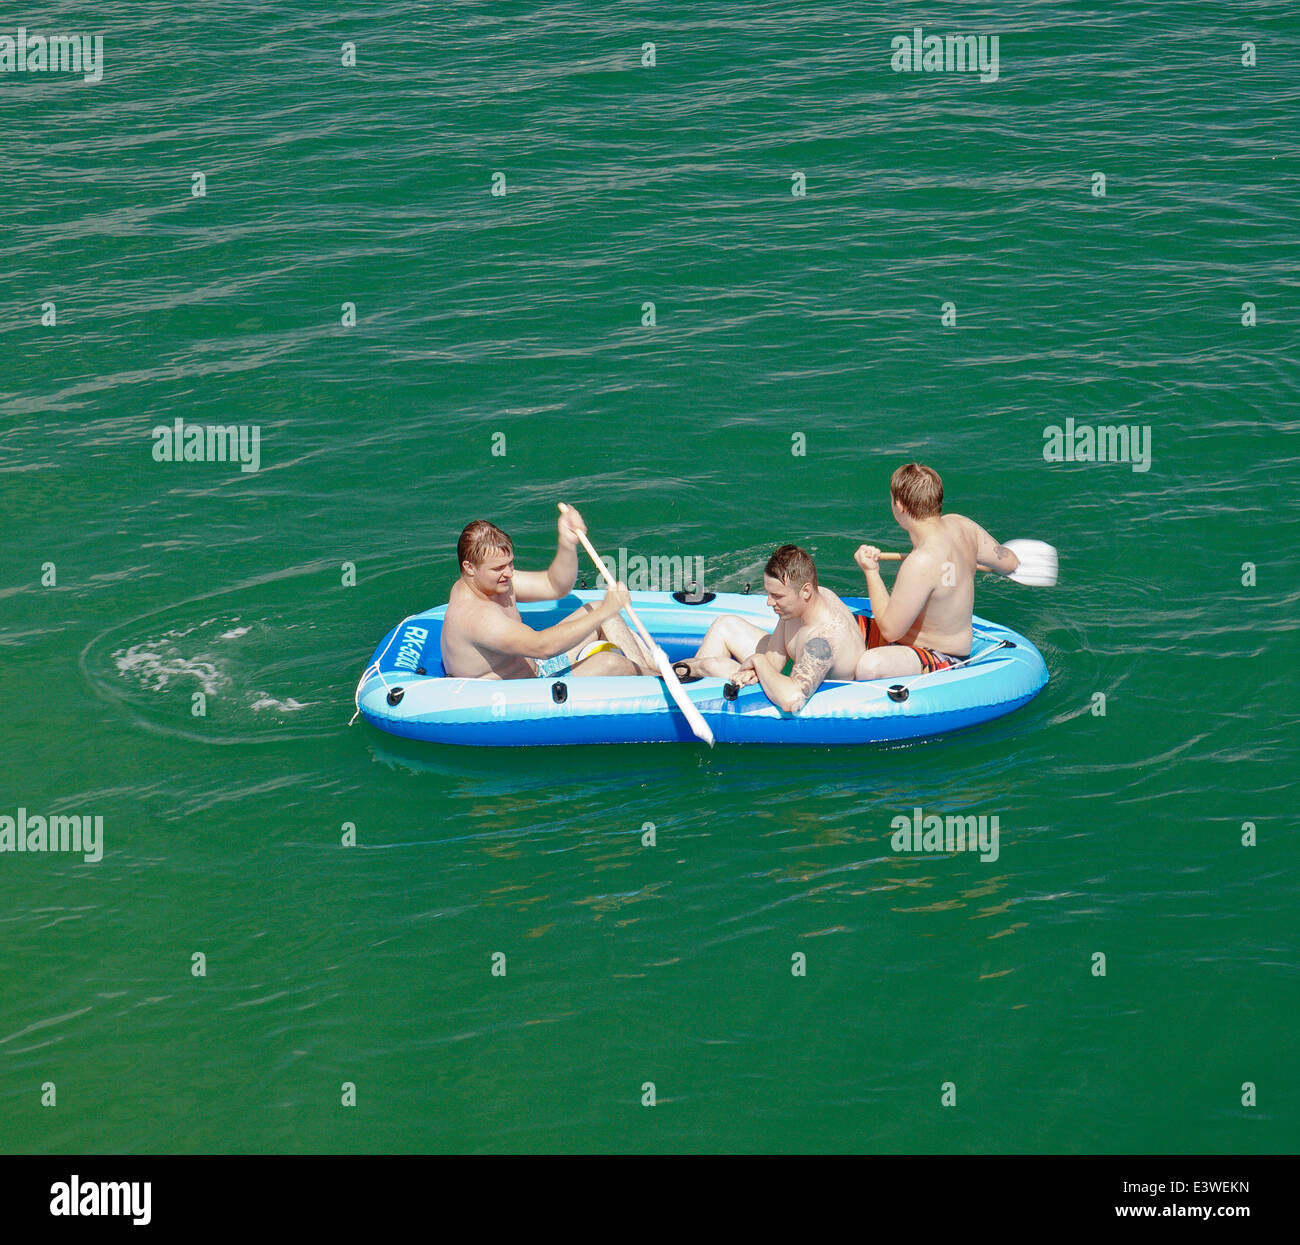 Three men in an inflatable boat. Stock Photo